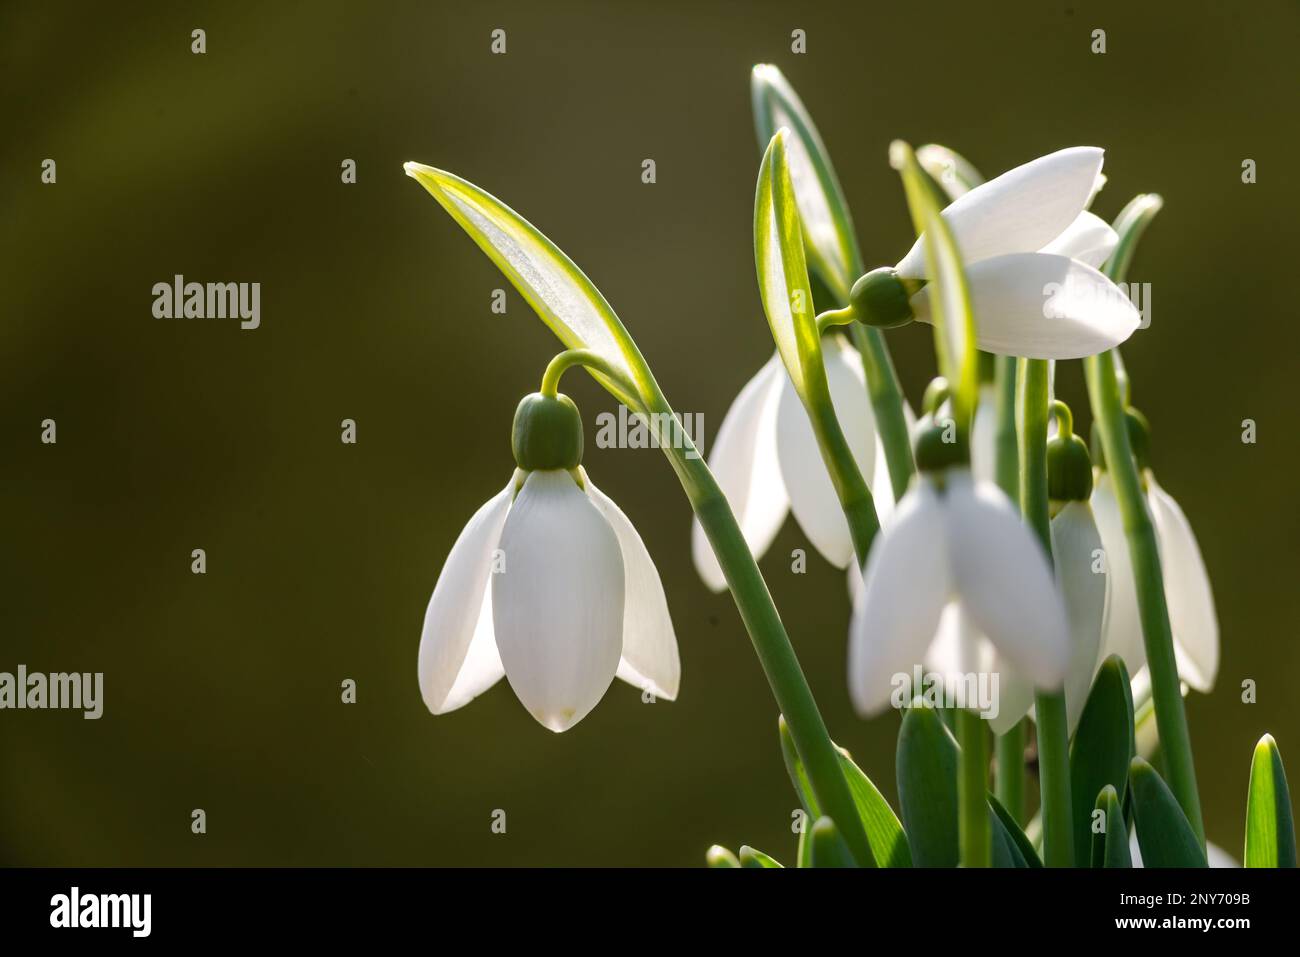 white snowdrop flowers Galanthus nivalis growth in snow. Beautiful spring natural green background. early spring season concept First flowers postcard Stock Photo